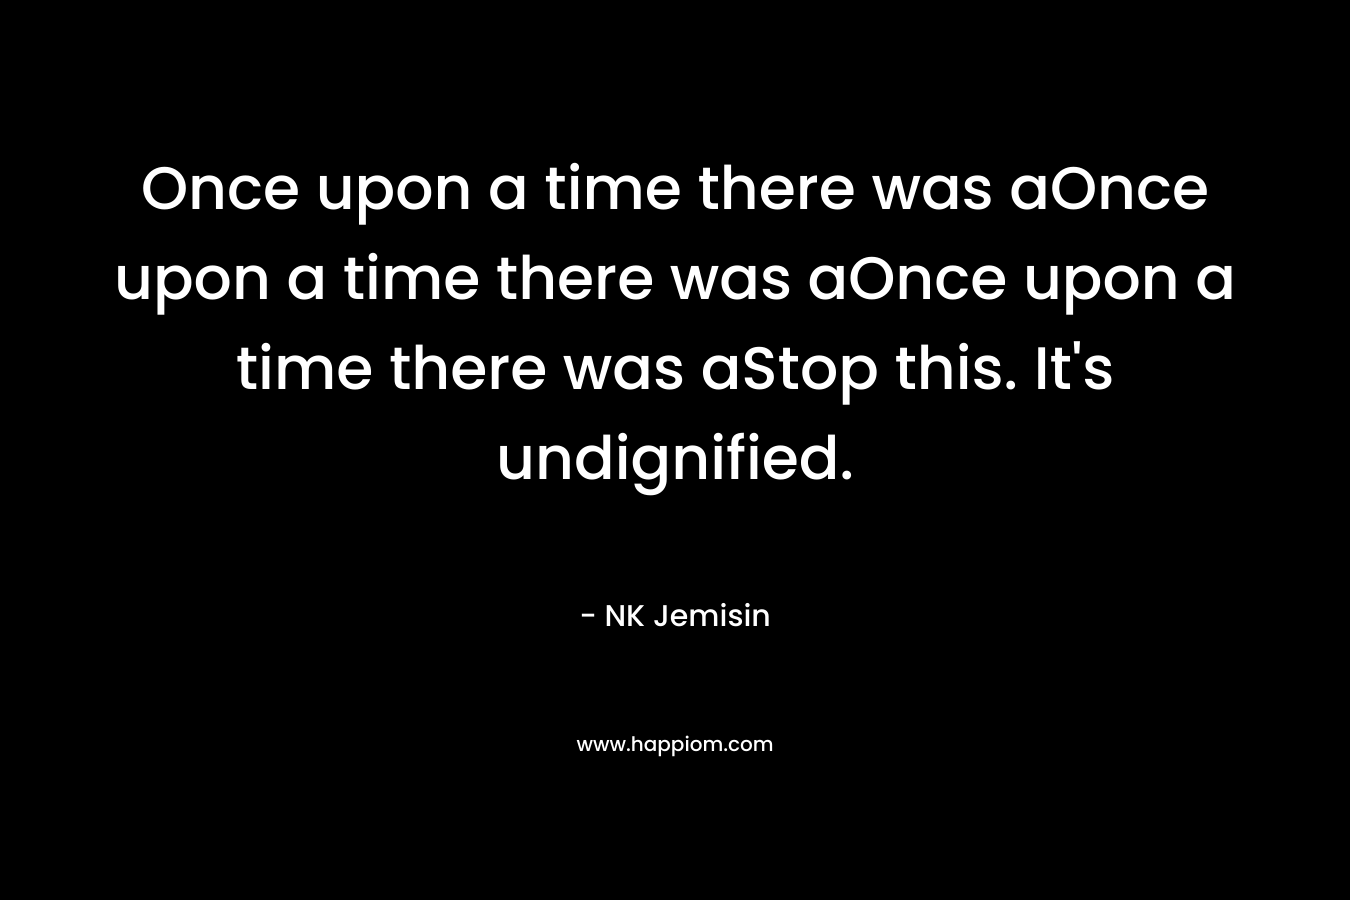 Once upon a time there was aOnce upon a time there was aOnce upon a time there was aStop this. It’s undignified. – NK Jemisin